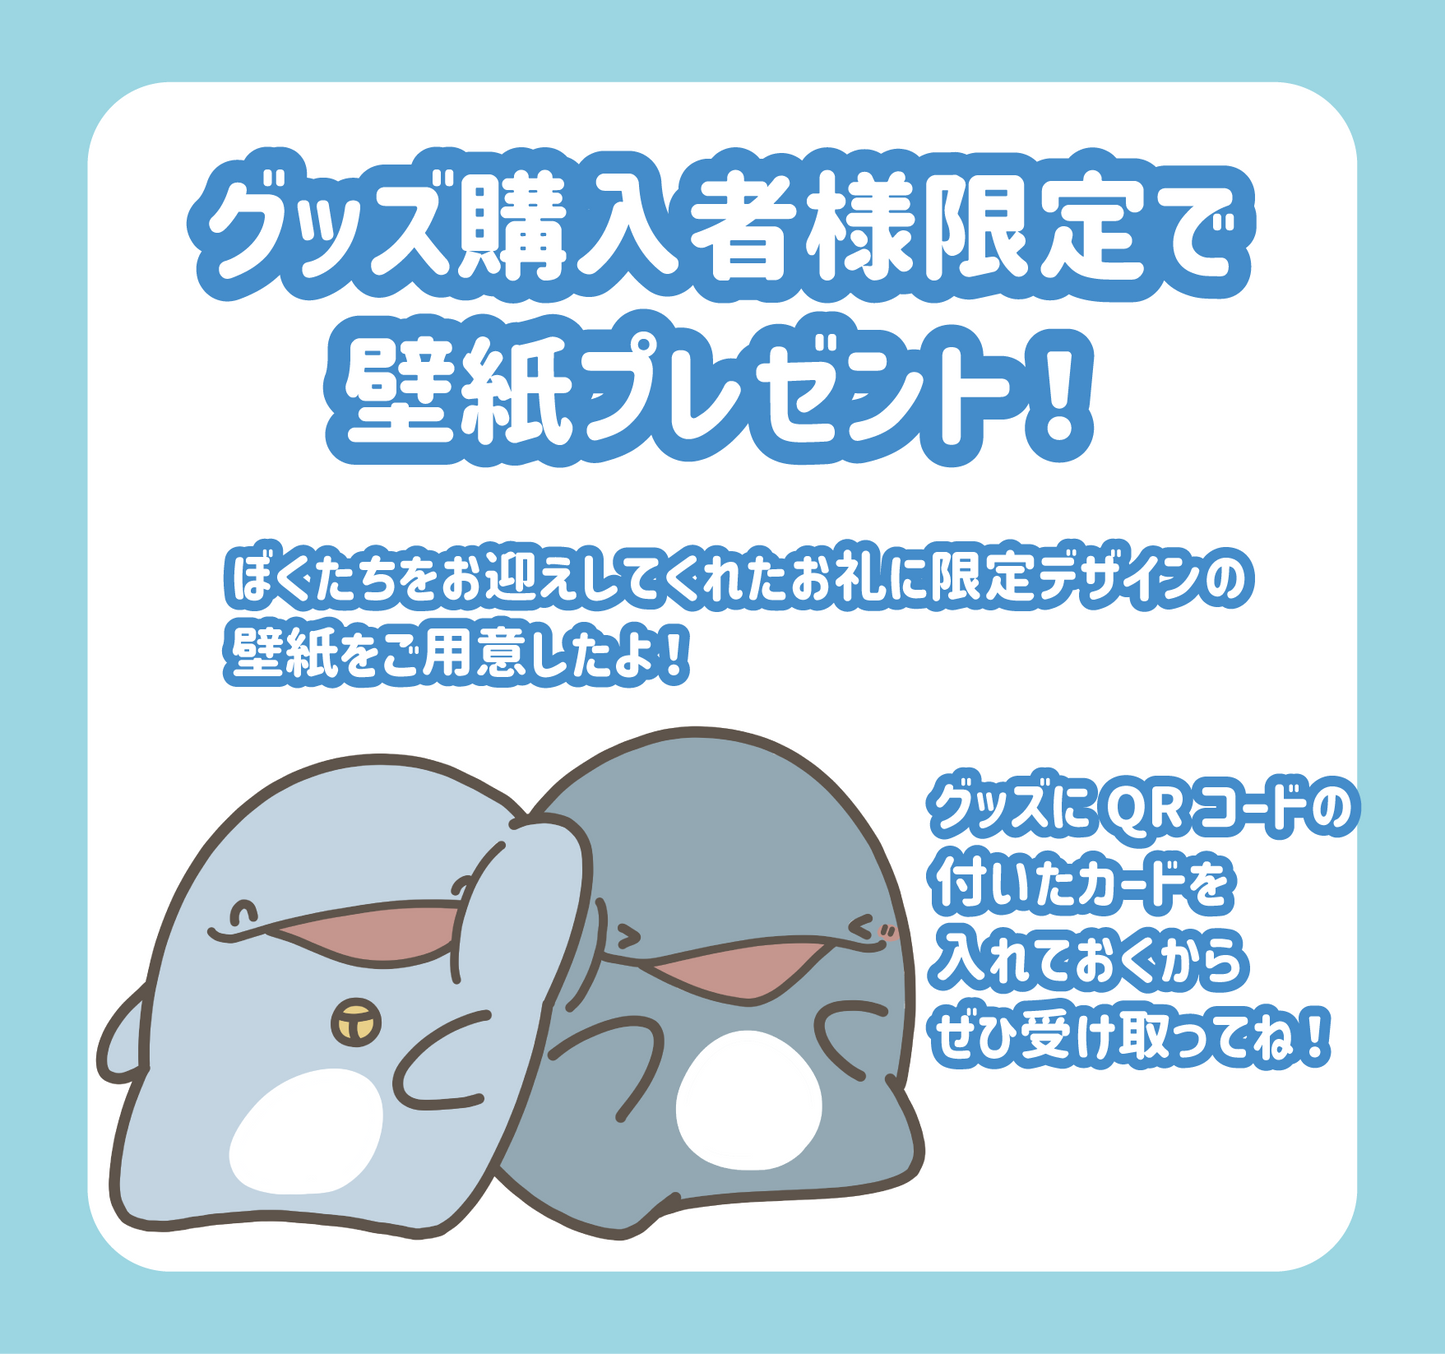 [Parent and child dolphin] Random can badge complete set (all 3 types) [shipped in mid-March]